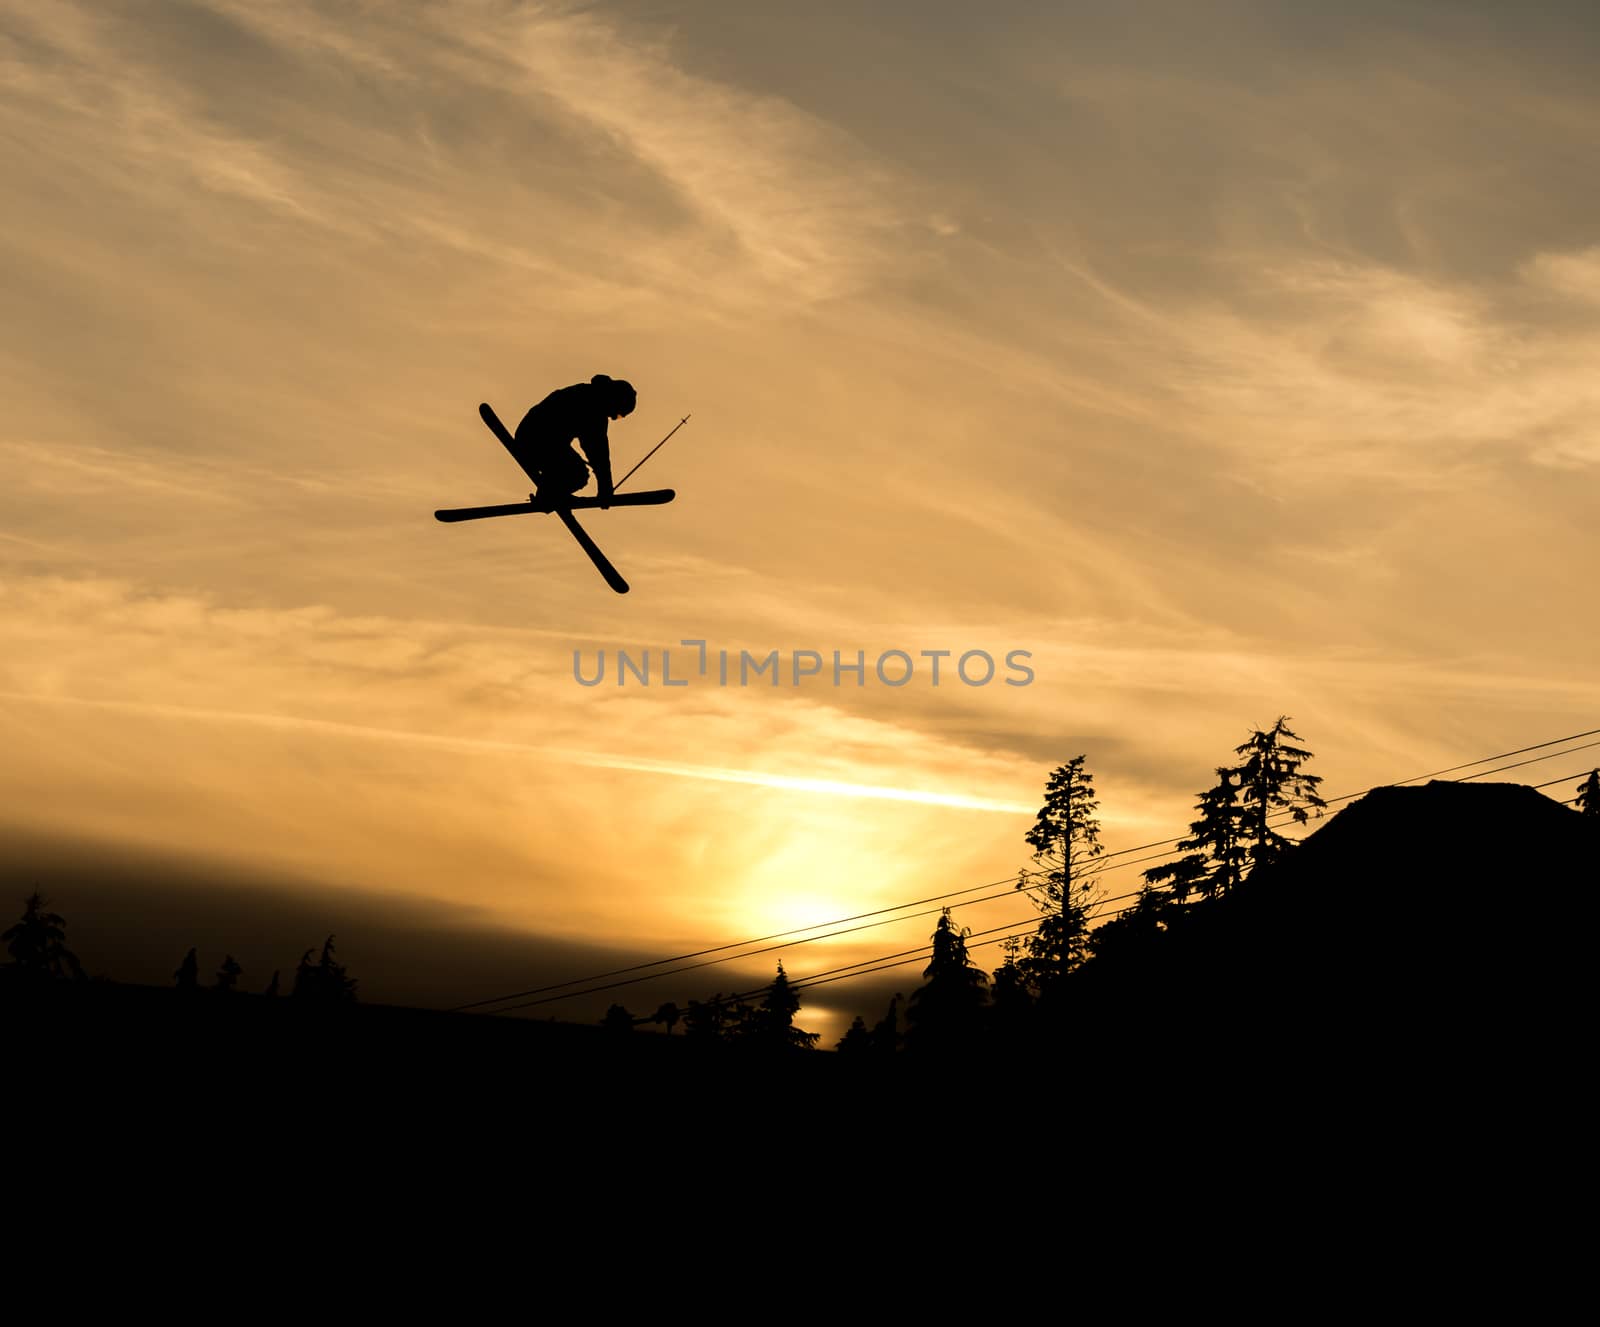 silhouette of skier doing grab off a jump in the sunset